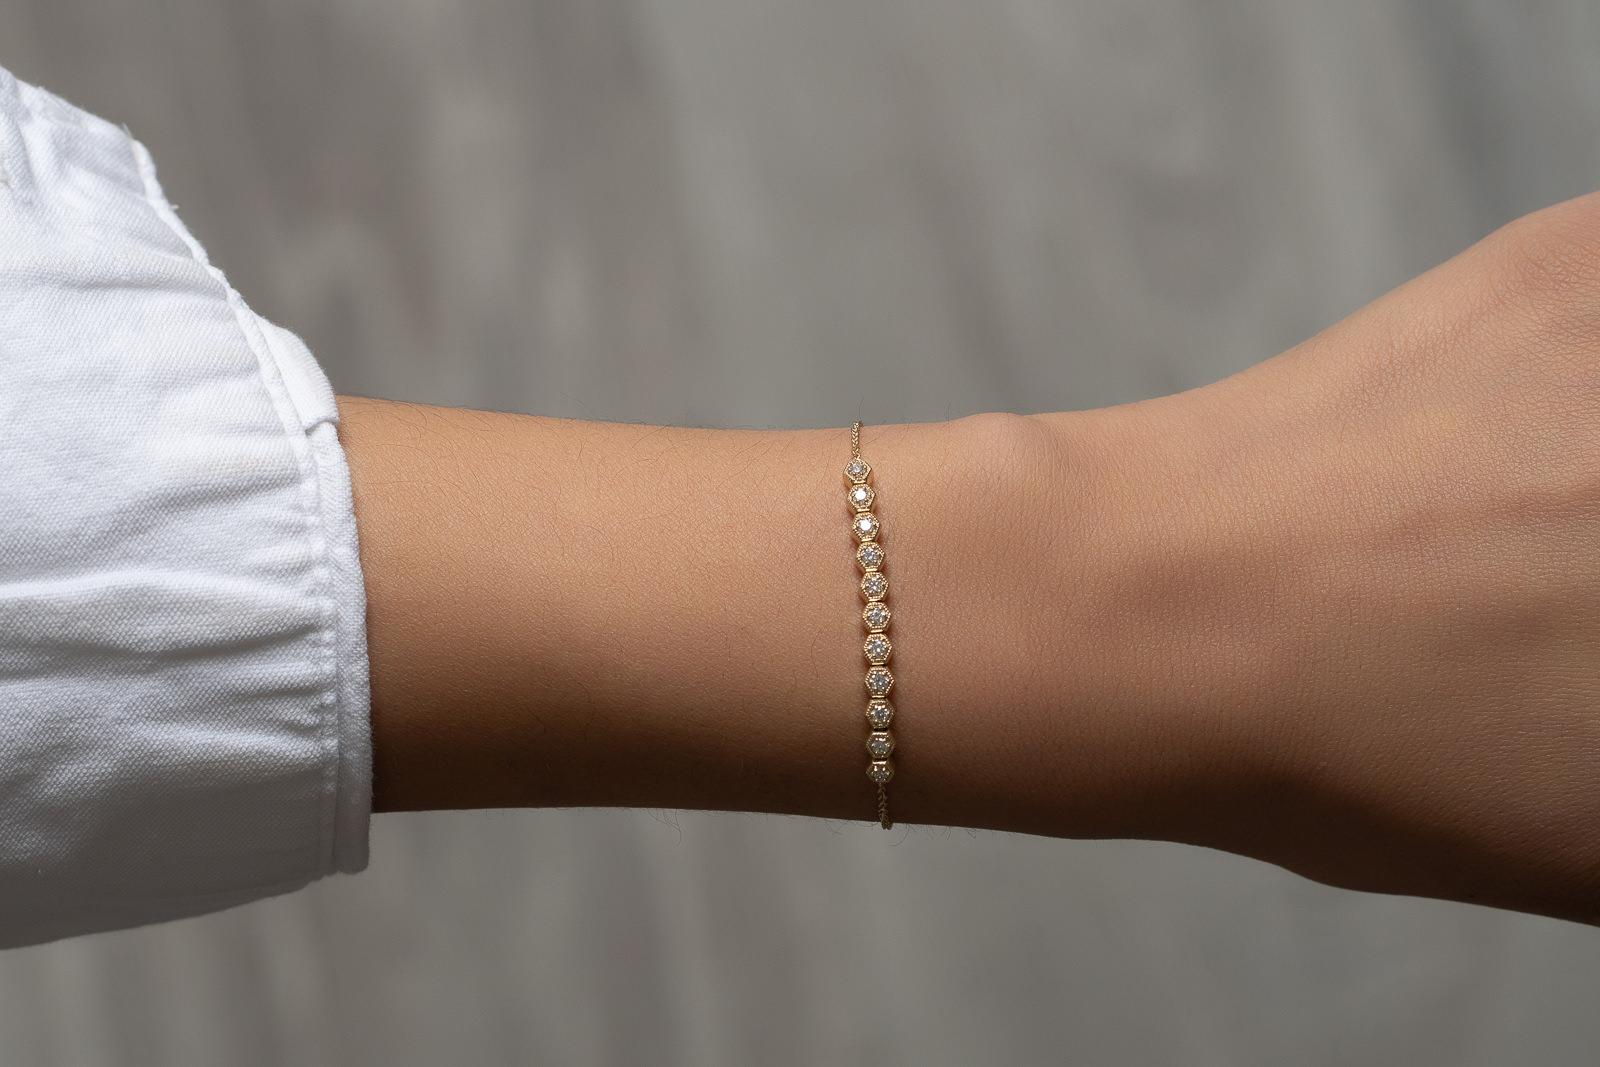 In trend with dainty and minimalistic jewelry, this romantic piece is the perfect stackable bracelet yet it's chic enough to wear as a standout. Layer your style with this 14k yellow gold bracelet featuring a honeycomb motif made of full cut